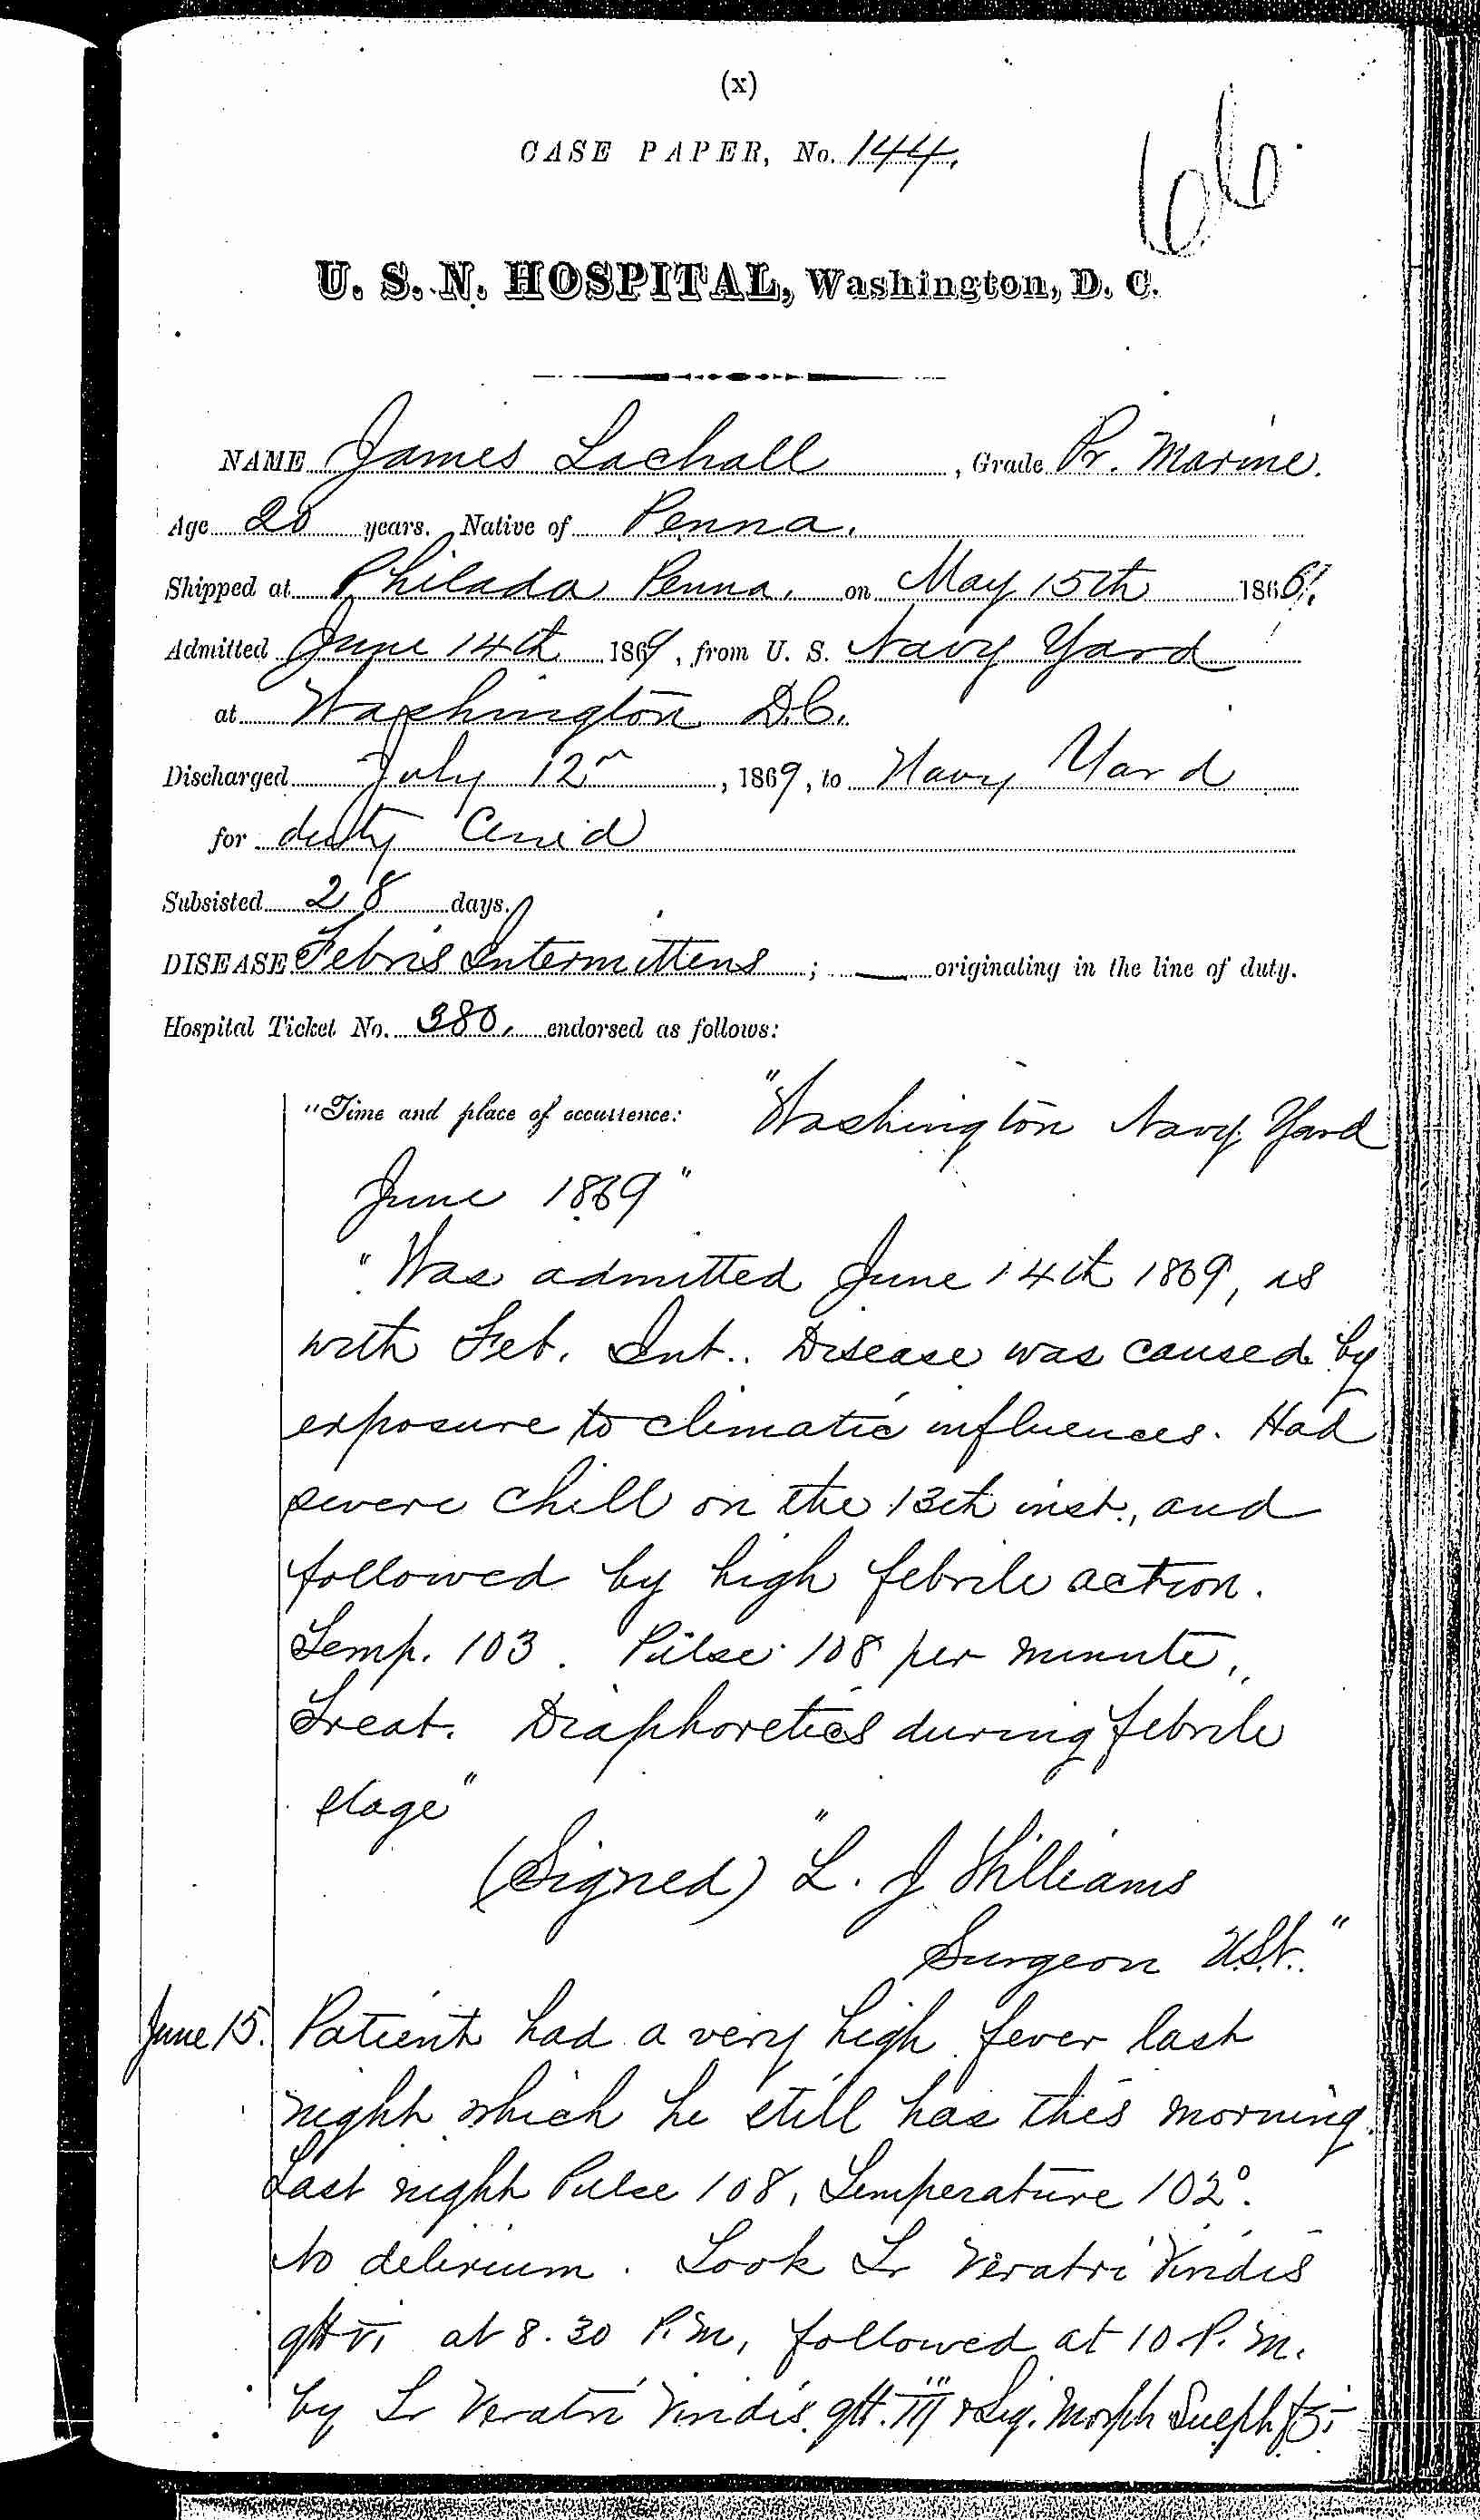 Entry for James Lachall (page 1 of 5) in the log Hospital Tickets and Case Papers - Naval Hospital - Washington, D.C. - 1868-69